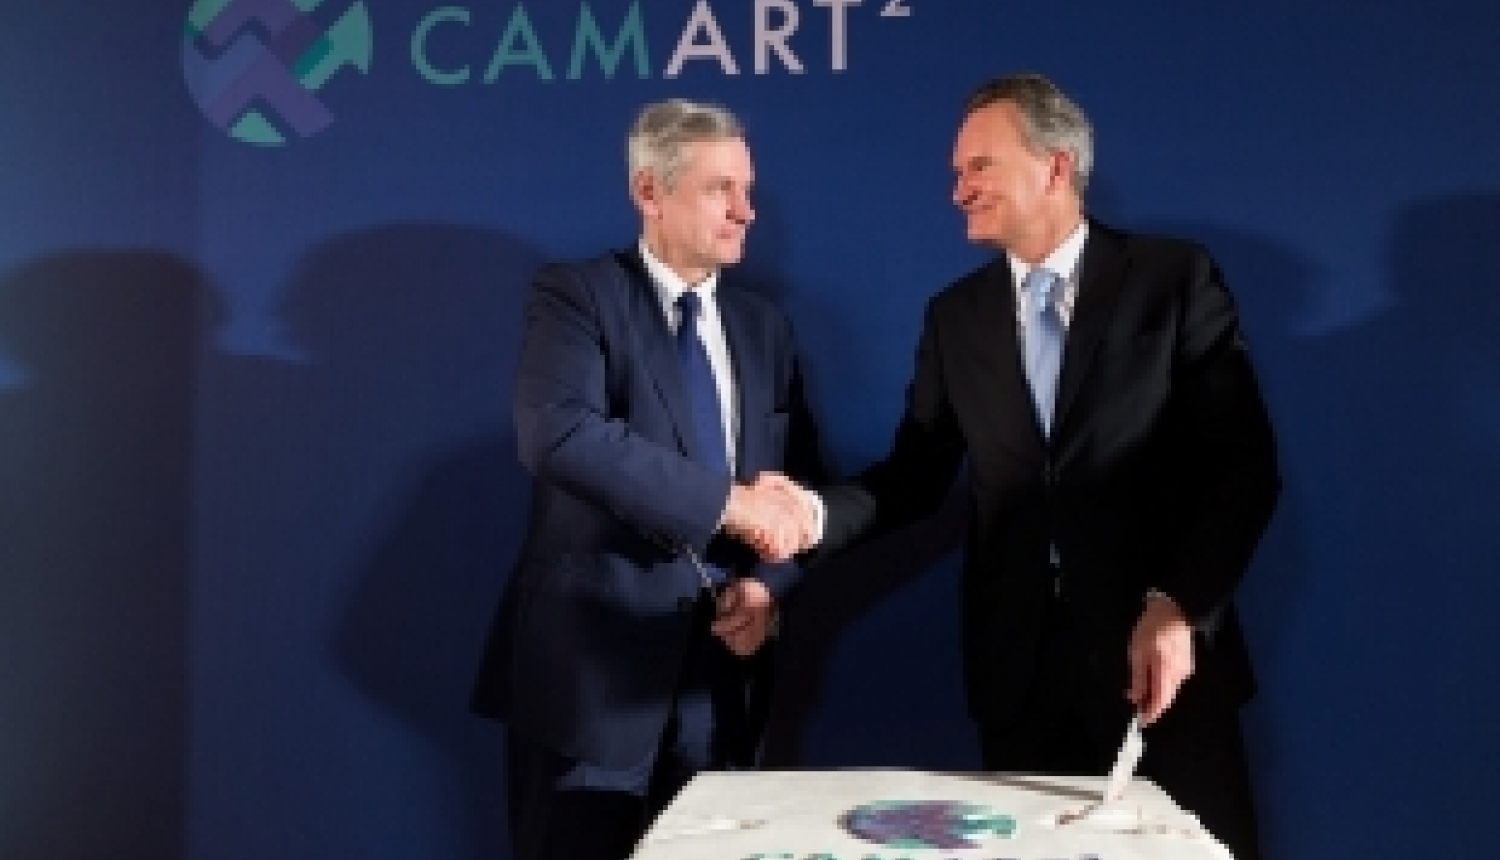 Through an international science project CAMART² Latvia becomes a Baltic Silicon Valley